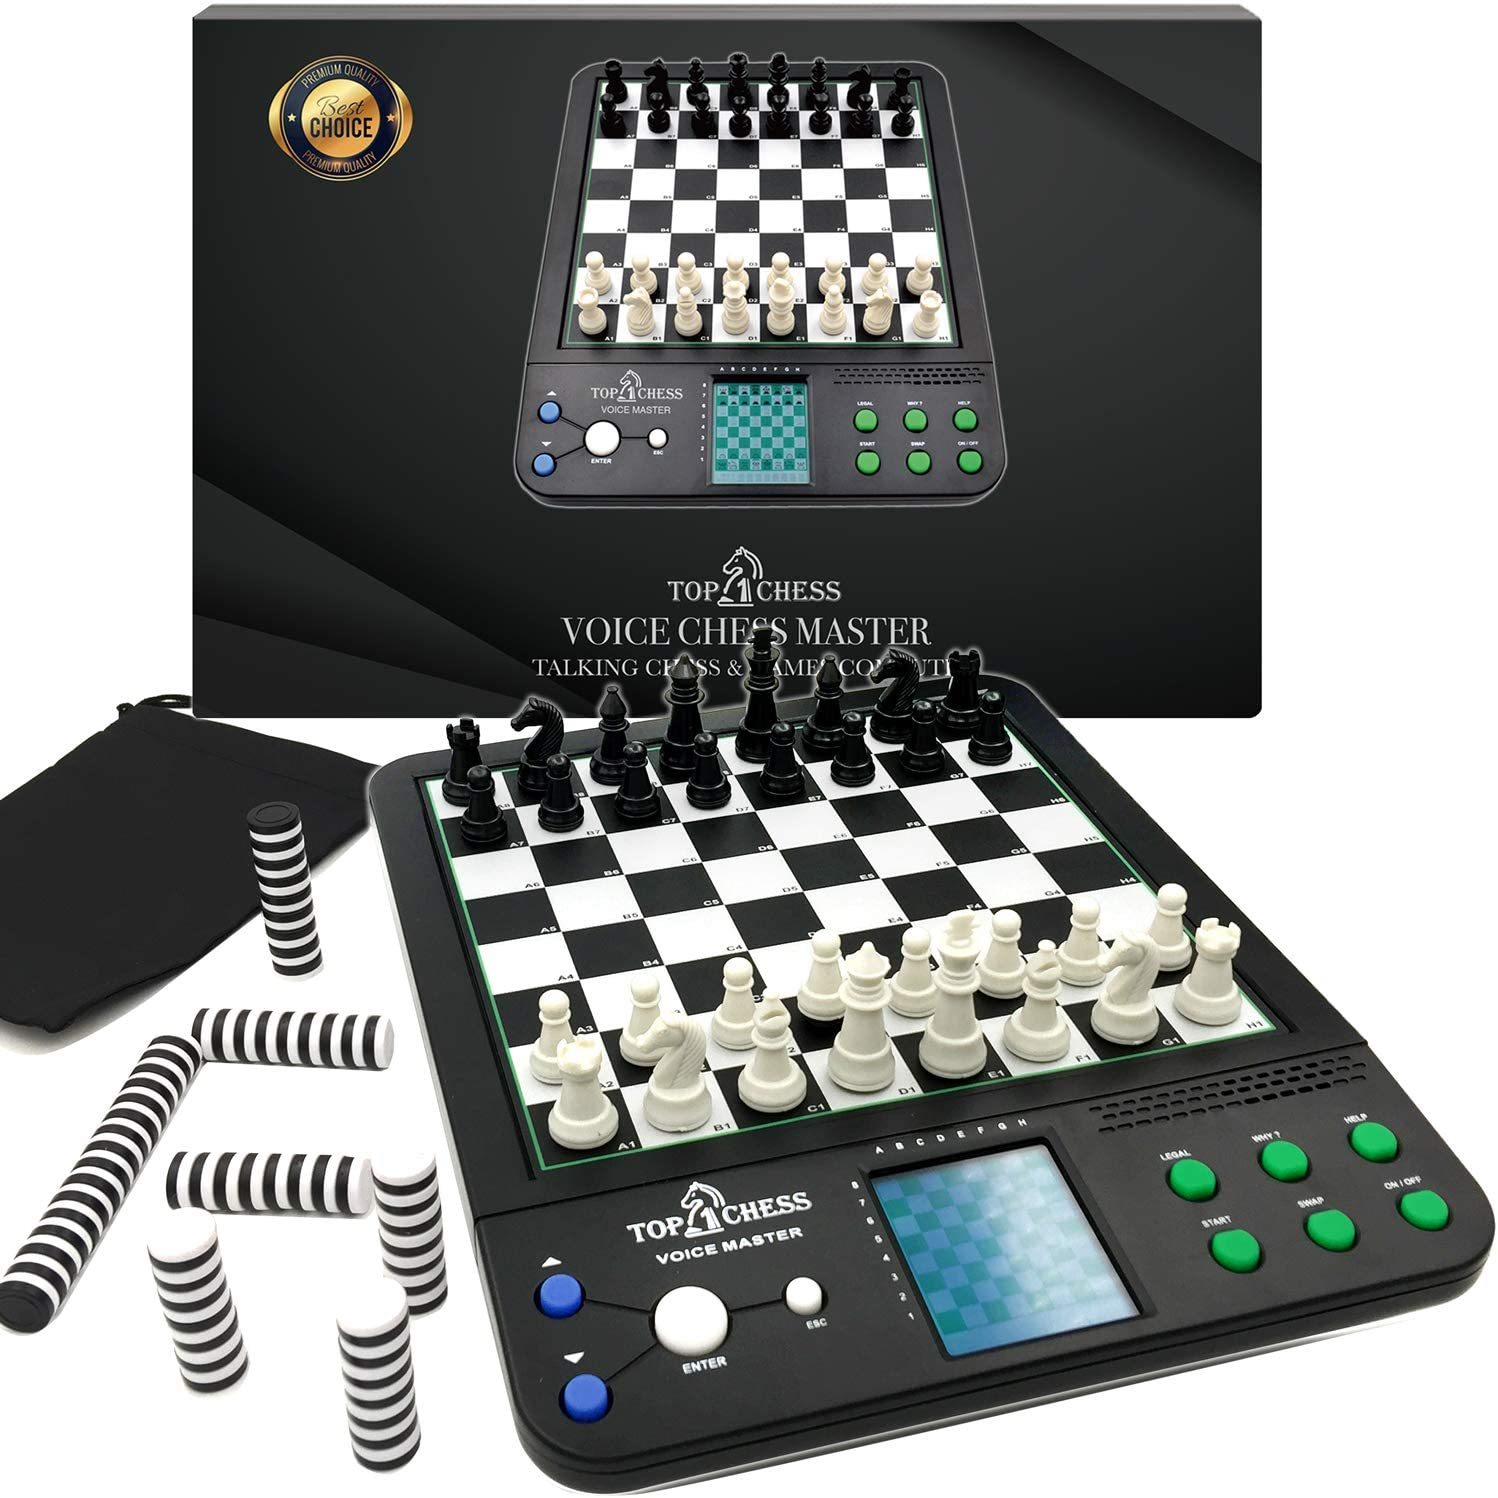 Top 1 Chess Set Board Game, Electronic Voice Chess Acad